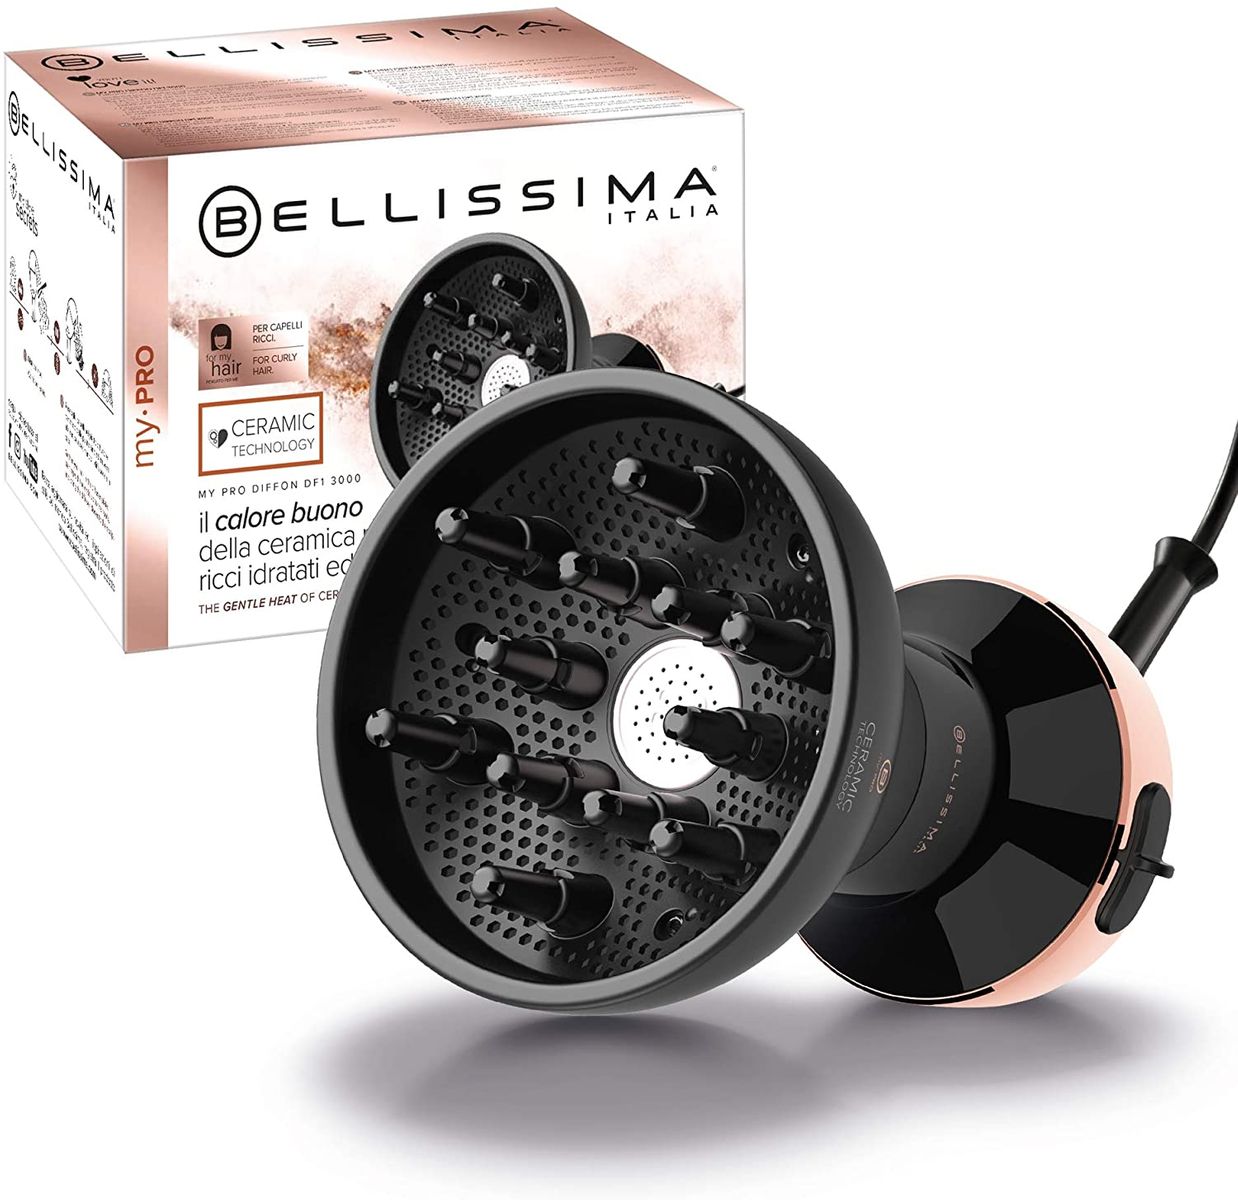 Imetec Bellissima My Pro Diffon Ceramic DF1 3000, hot air diffuser for curly hair, ceramic technology, 700 W, 2 air/temperature combinations, without frizz effect.